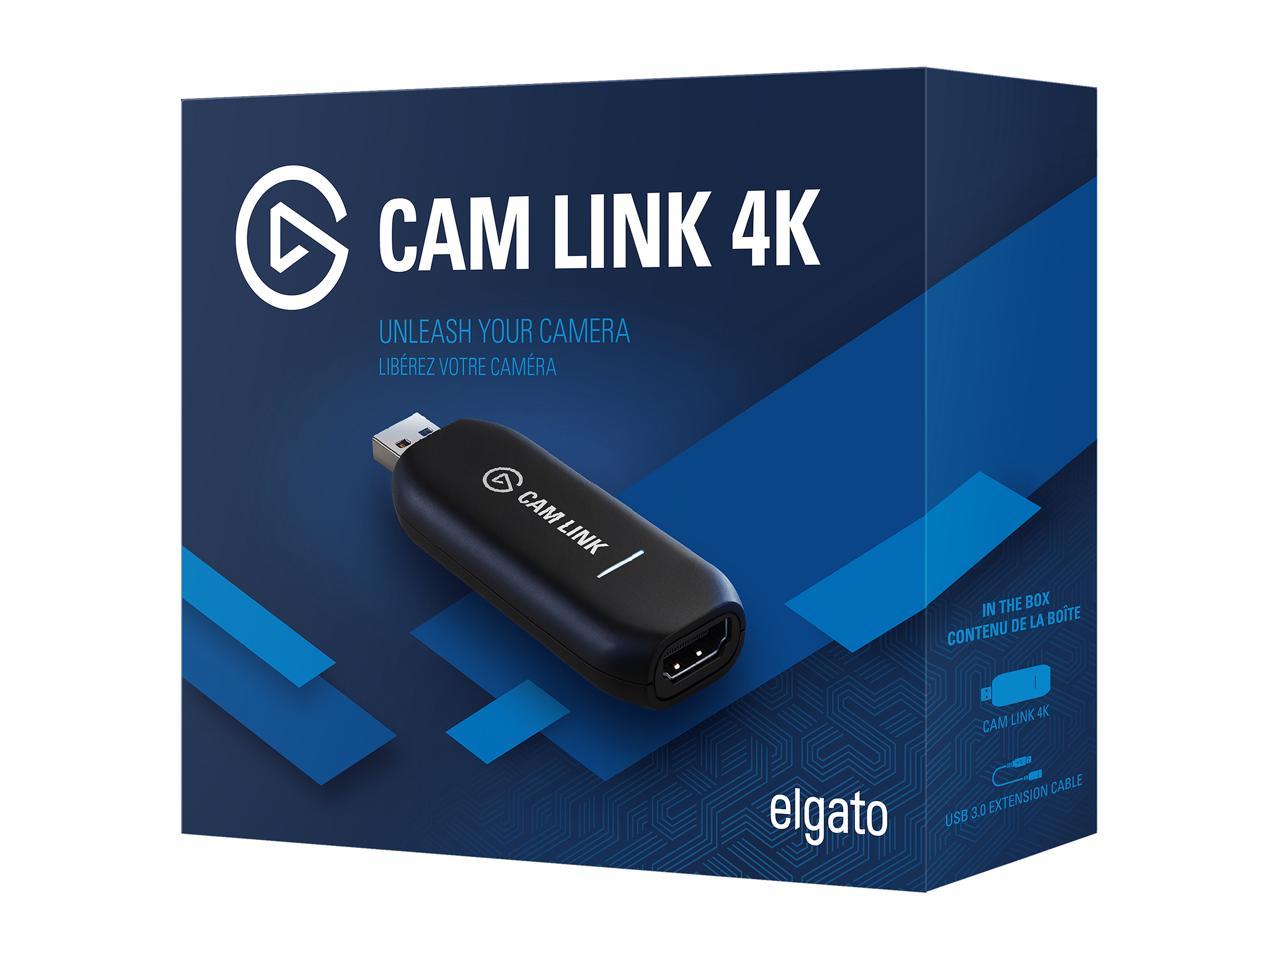 Elgato Cam Link 4K - HDMI to USB 3.0 Camera Connector, Broadcast Live and Record in 1080p60 or 4K at 30 fps via a Compatible DSLR, Camcorder or Action Cam - image 4 of 5